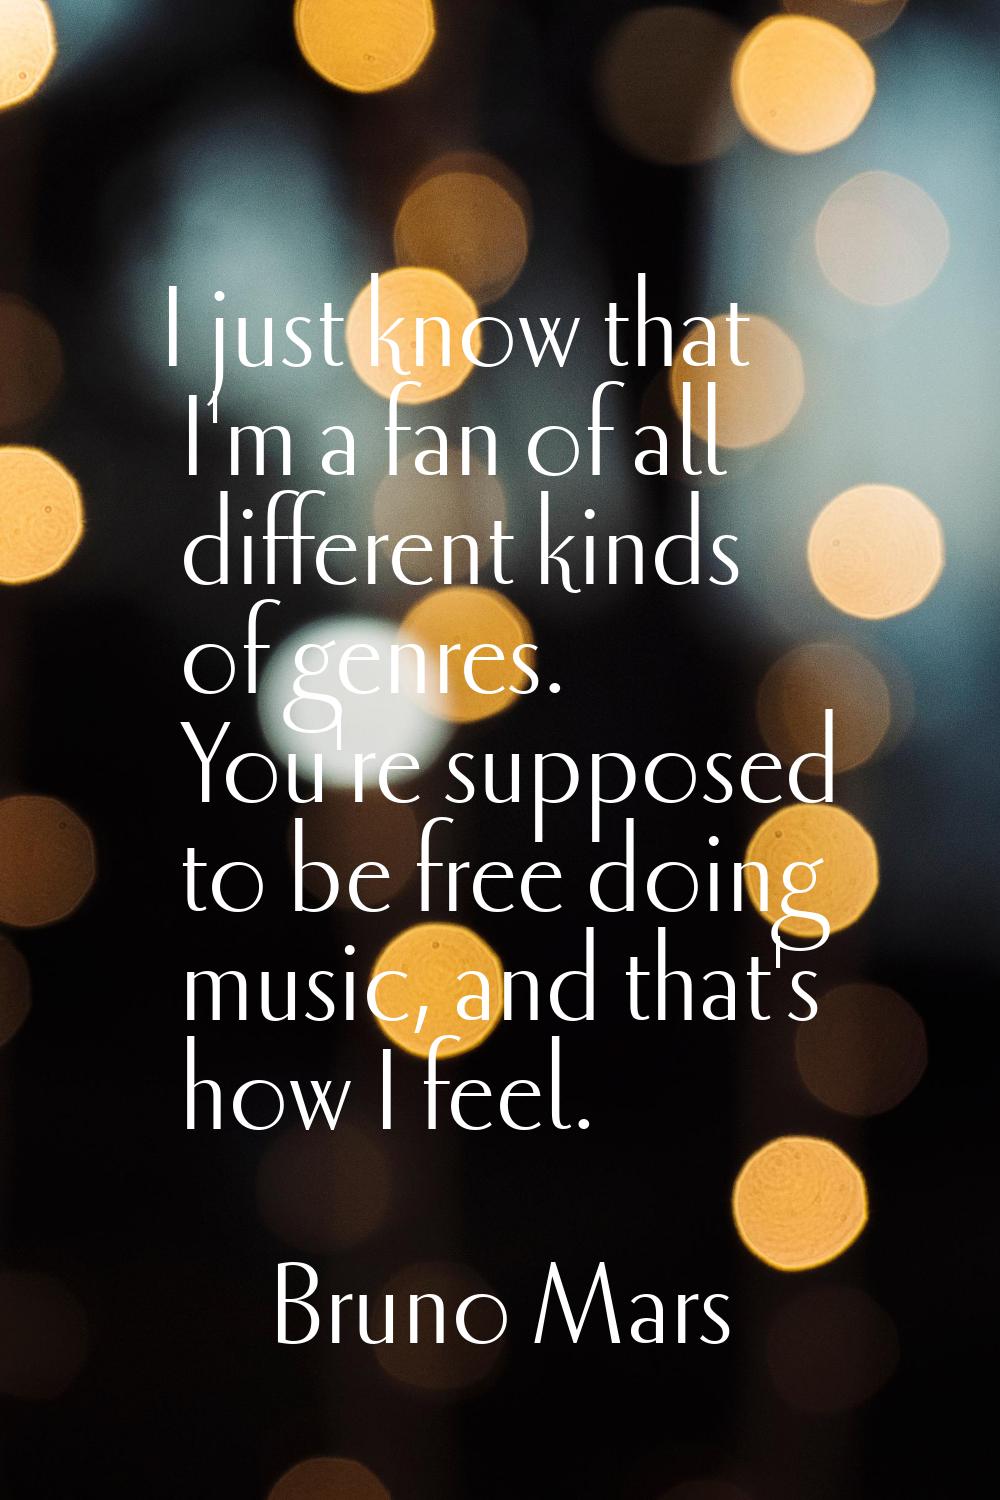 I just know that I'm a fan of all different kinds of genres. You're supposed to be free doing music